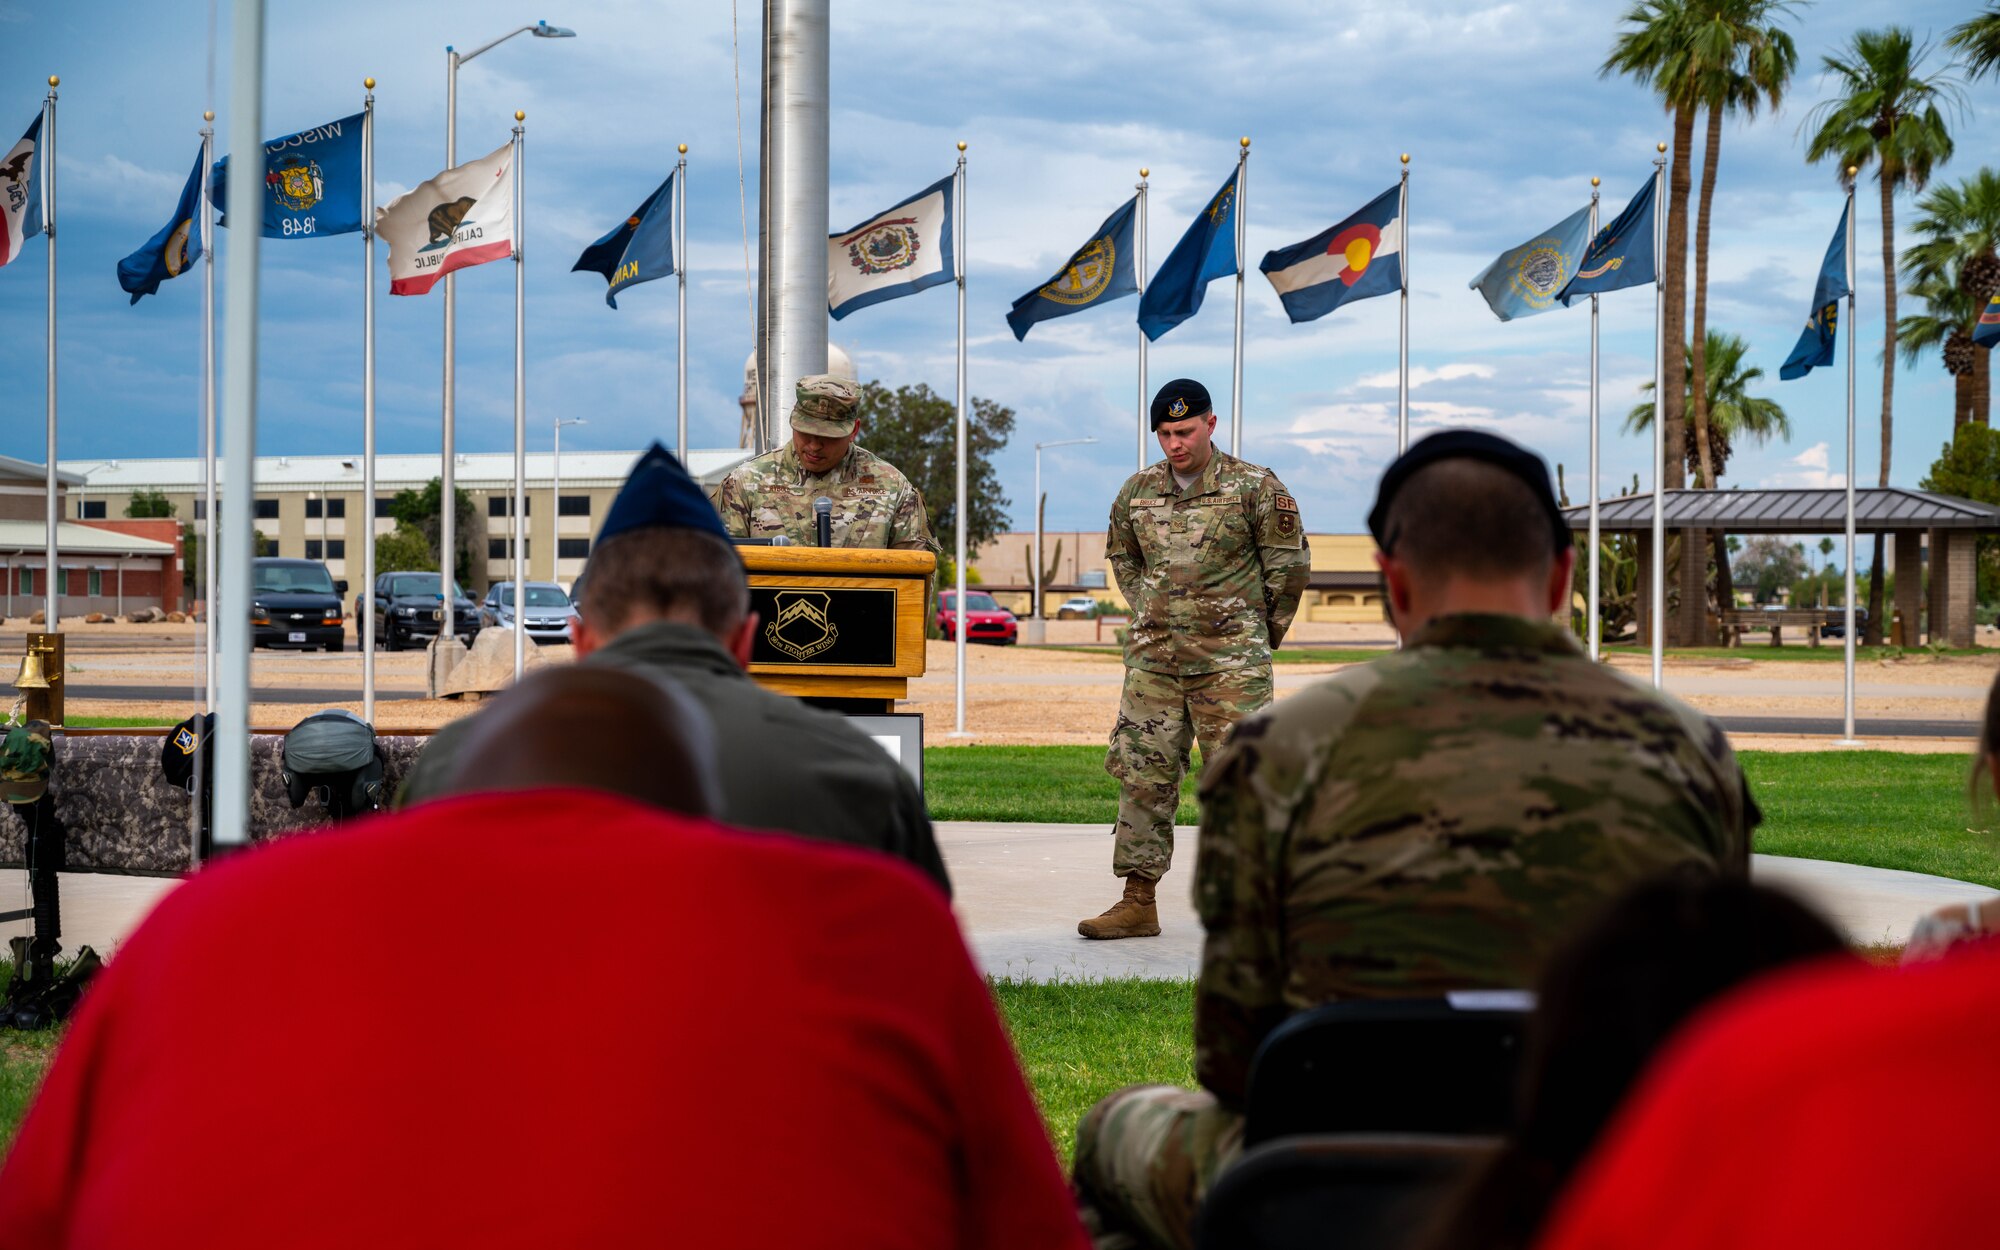 U.S. Air Force Capt. Jeffrey Rybold, 56th Fighter Wing chaplain, provides an invocation, May 19, 2023, at Luke Air Force Base, Arizona.